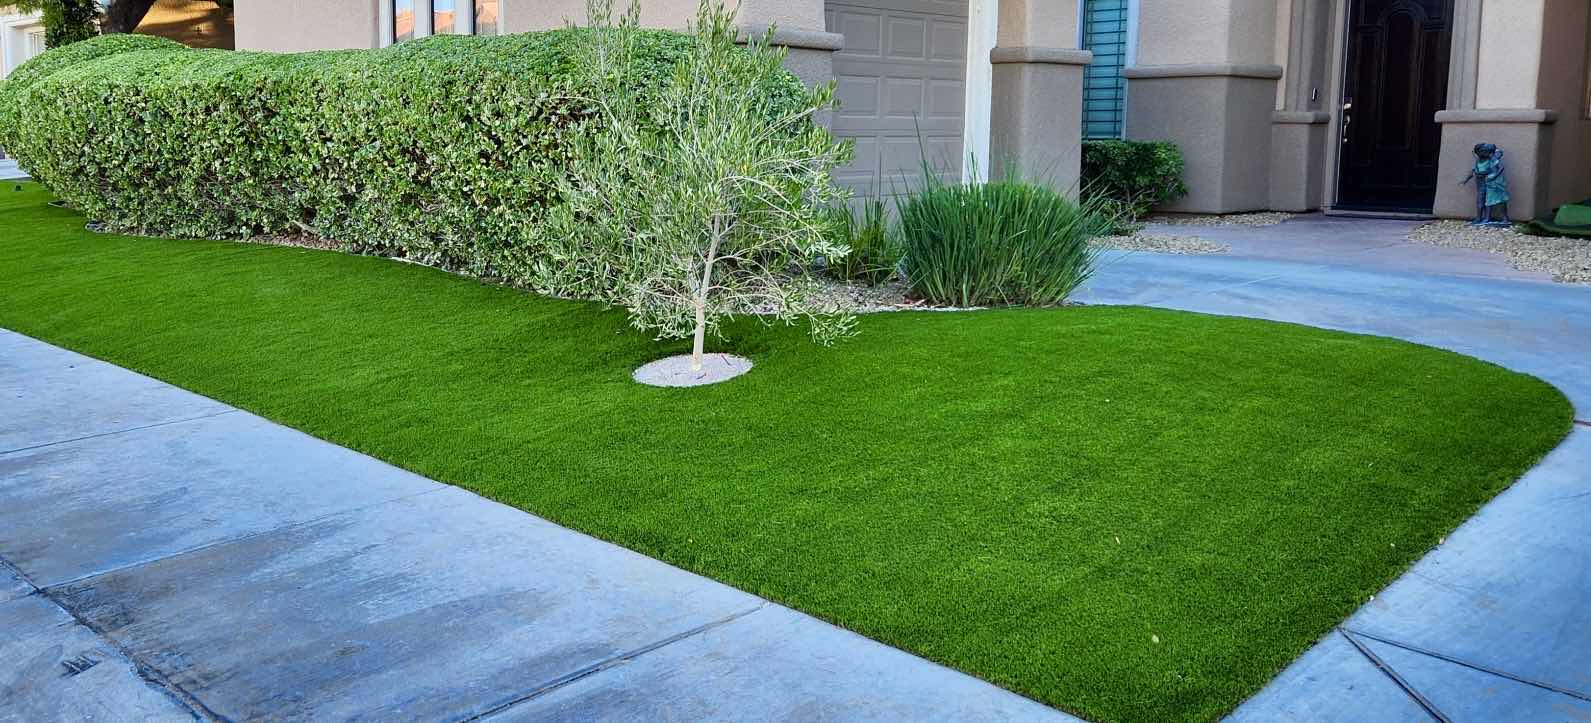 Photo 1 of SUPREME PREMIUM QUALITY ARTIFICIAL TURF GRASS 15’ X 100’ (1500 TOTAL SQ FT) ANTHEM COUNTRY CLUB APPROVED TOTAL TURF HEIGHT 1.97”(((pick-up Sun 5/26 AND Mon 5/27)))